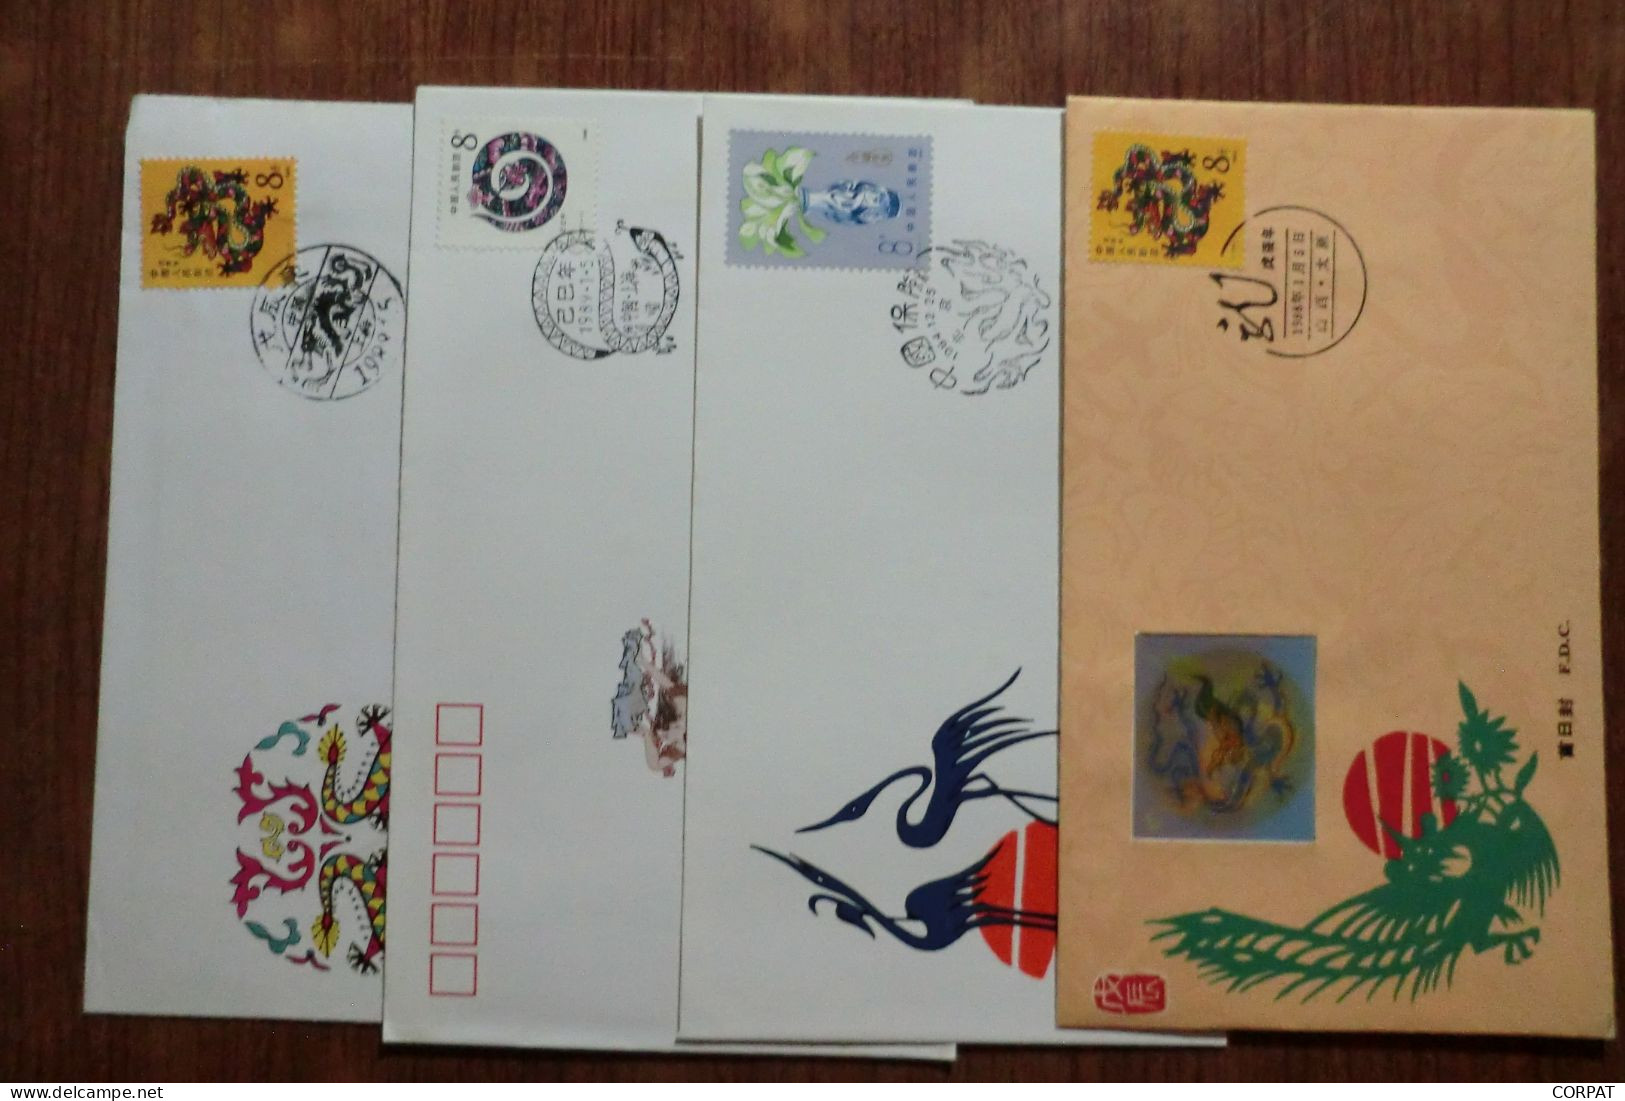 CHINA: lot of FDC 80 years   (7 photos)